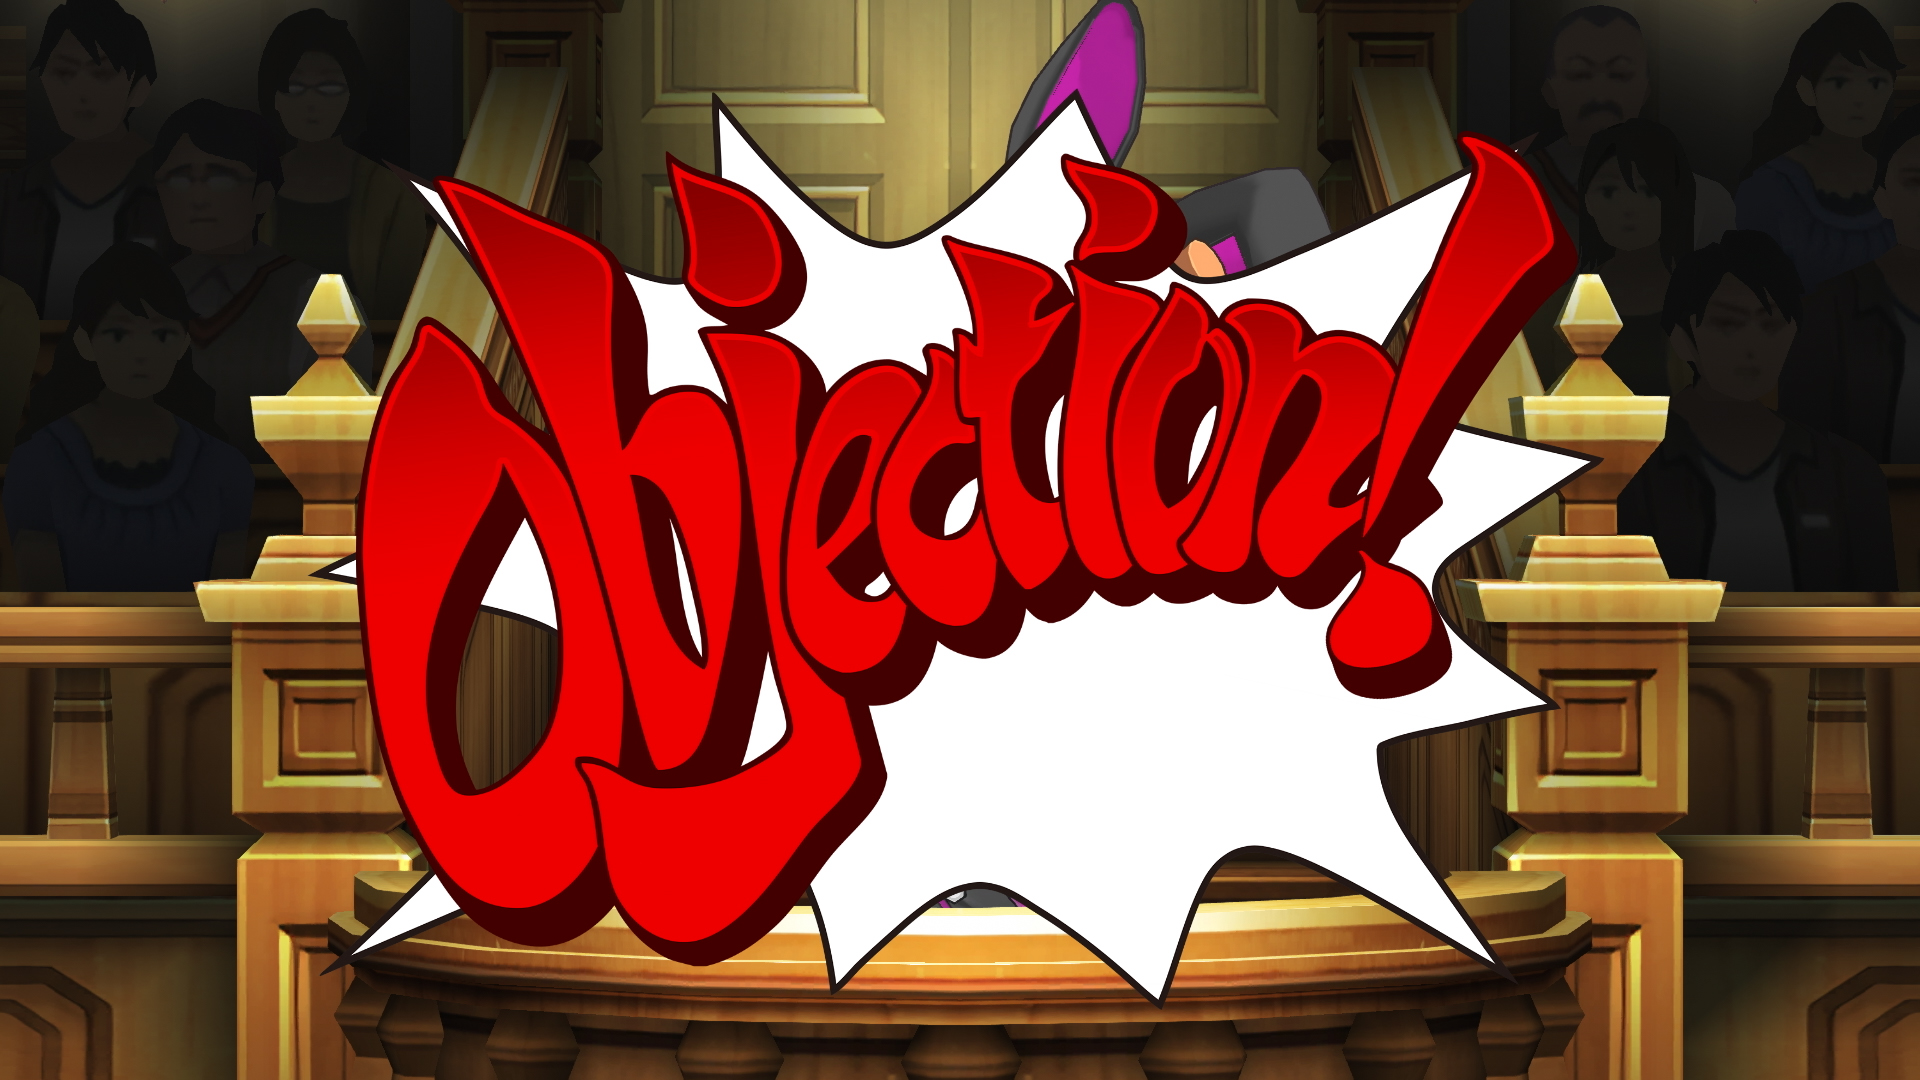 Apollo Justice: Ace Attorney Trilogy Steam Key for PC - Buy now